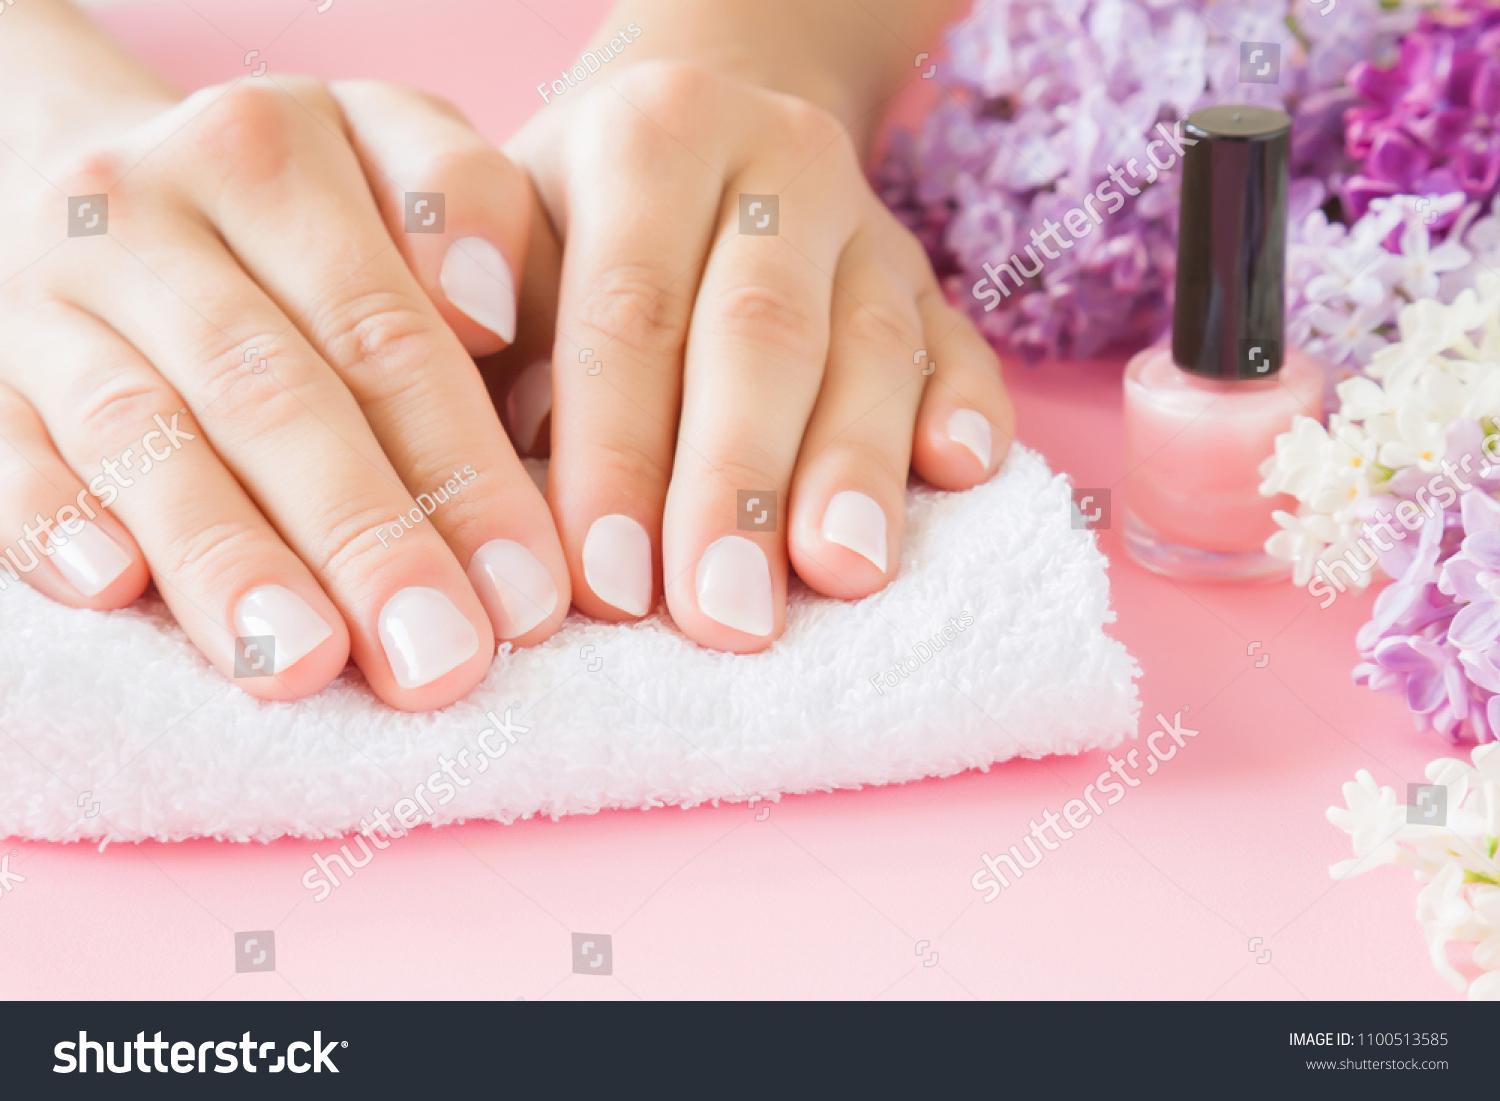 Young, perfect, groomed woman's hands on white towel. Nail varnishing in light pink color. Nails care. Manicure, pedicure beauty salon. Beautiful branches of lilac blossoms. Colorful, fresh flowers.
 #1100513585